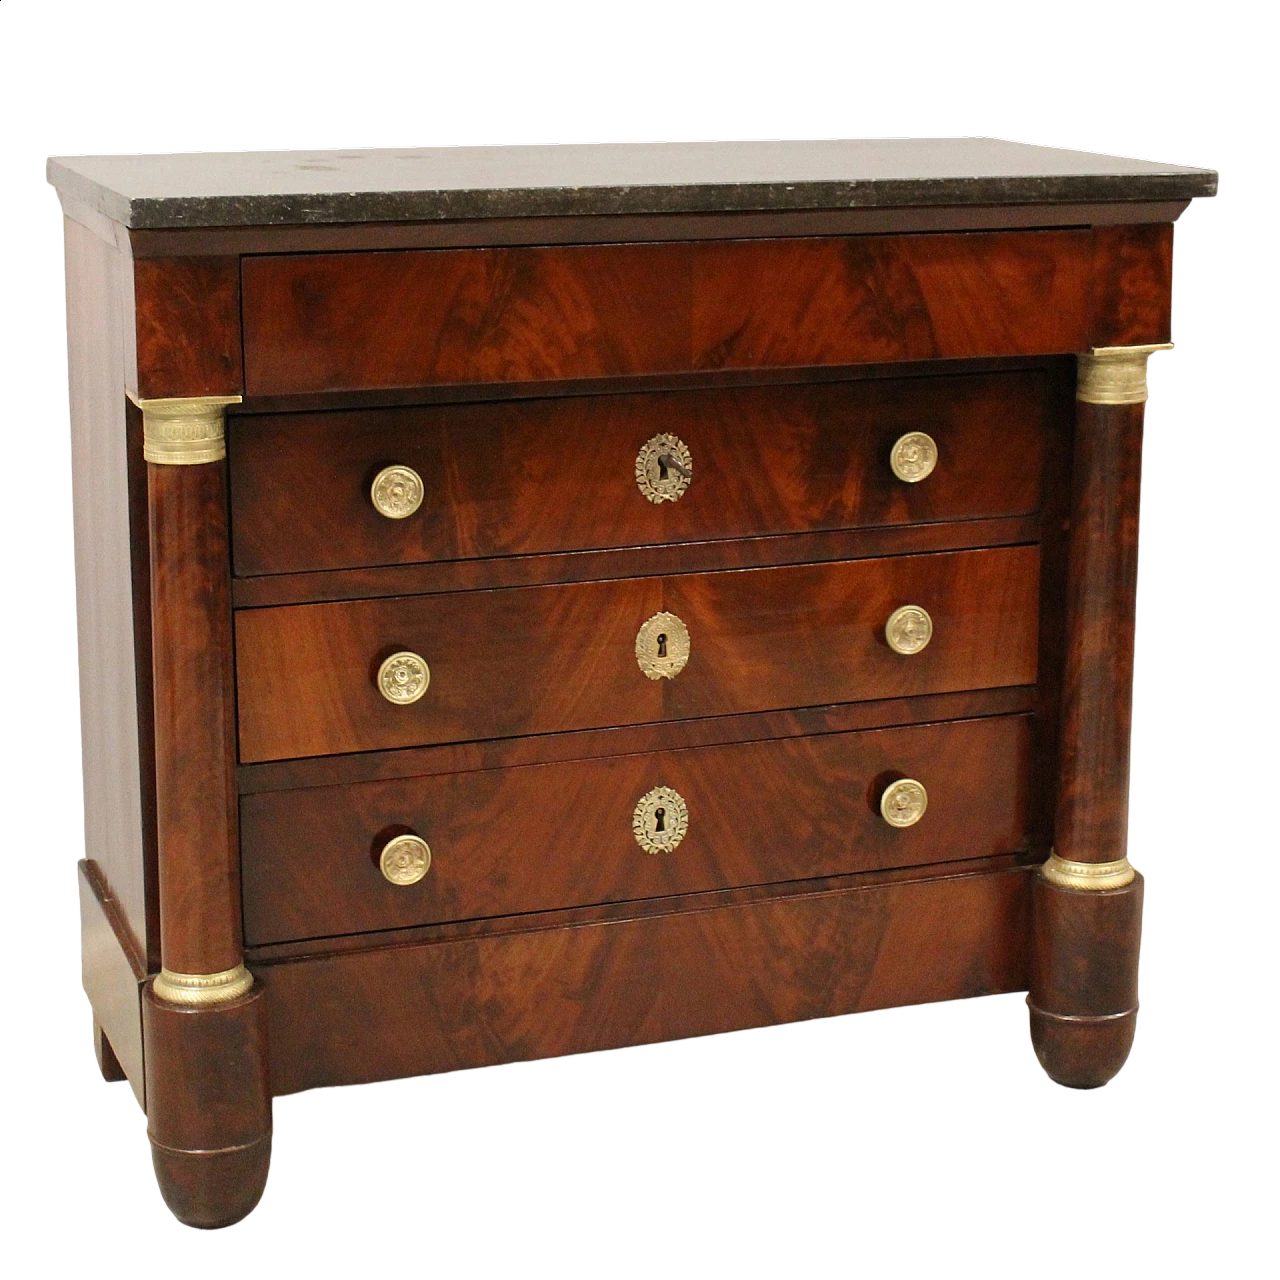 Mahogany Empire chest of drawers with marble top, early 19th century 10